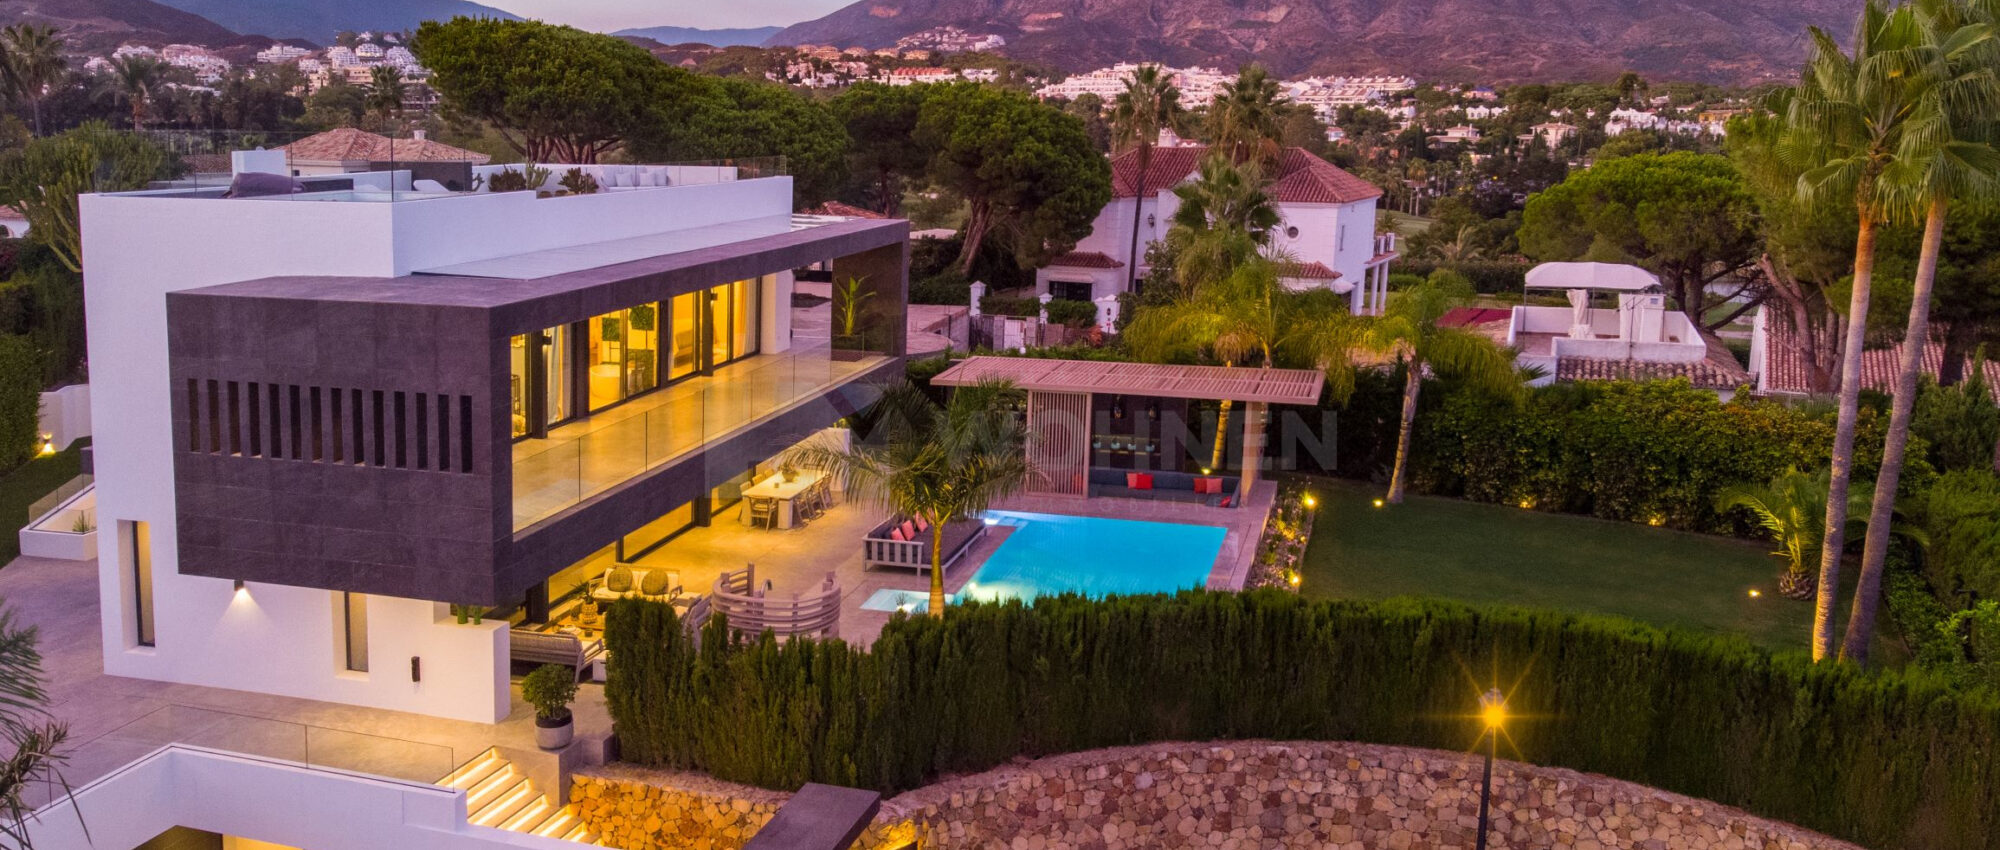 Contemporary luxury Villa in the heart of the popular residential area of Nueva Andalucia